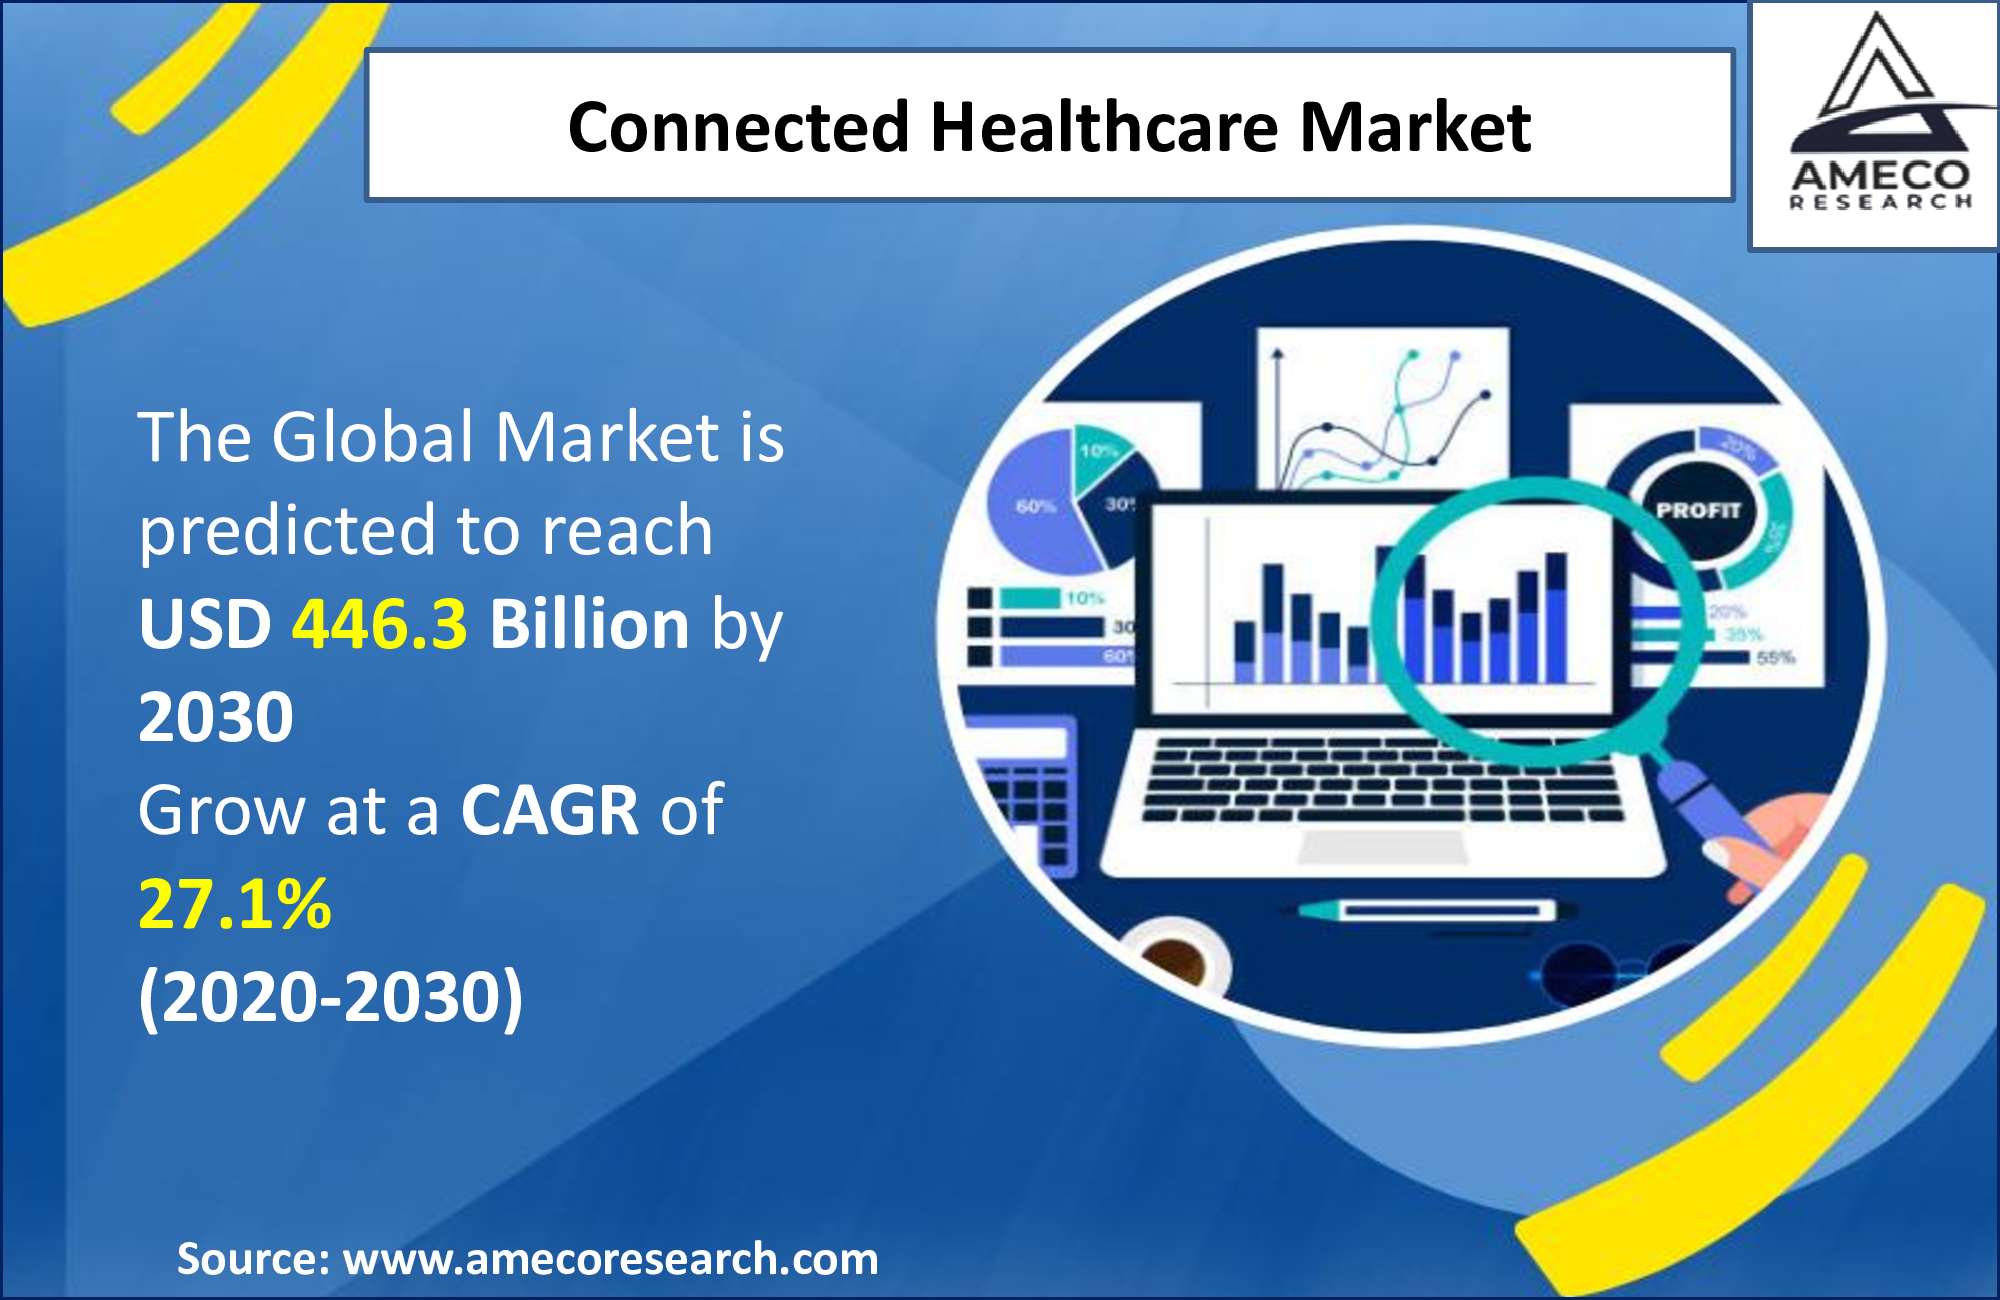 Connected Healthcare Market